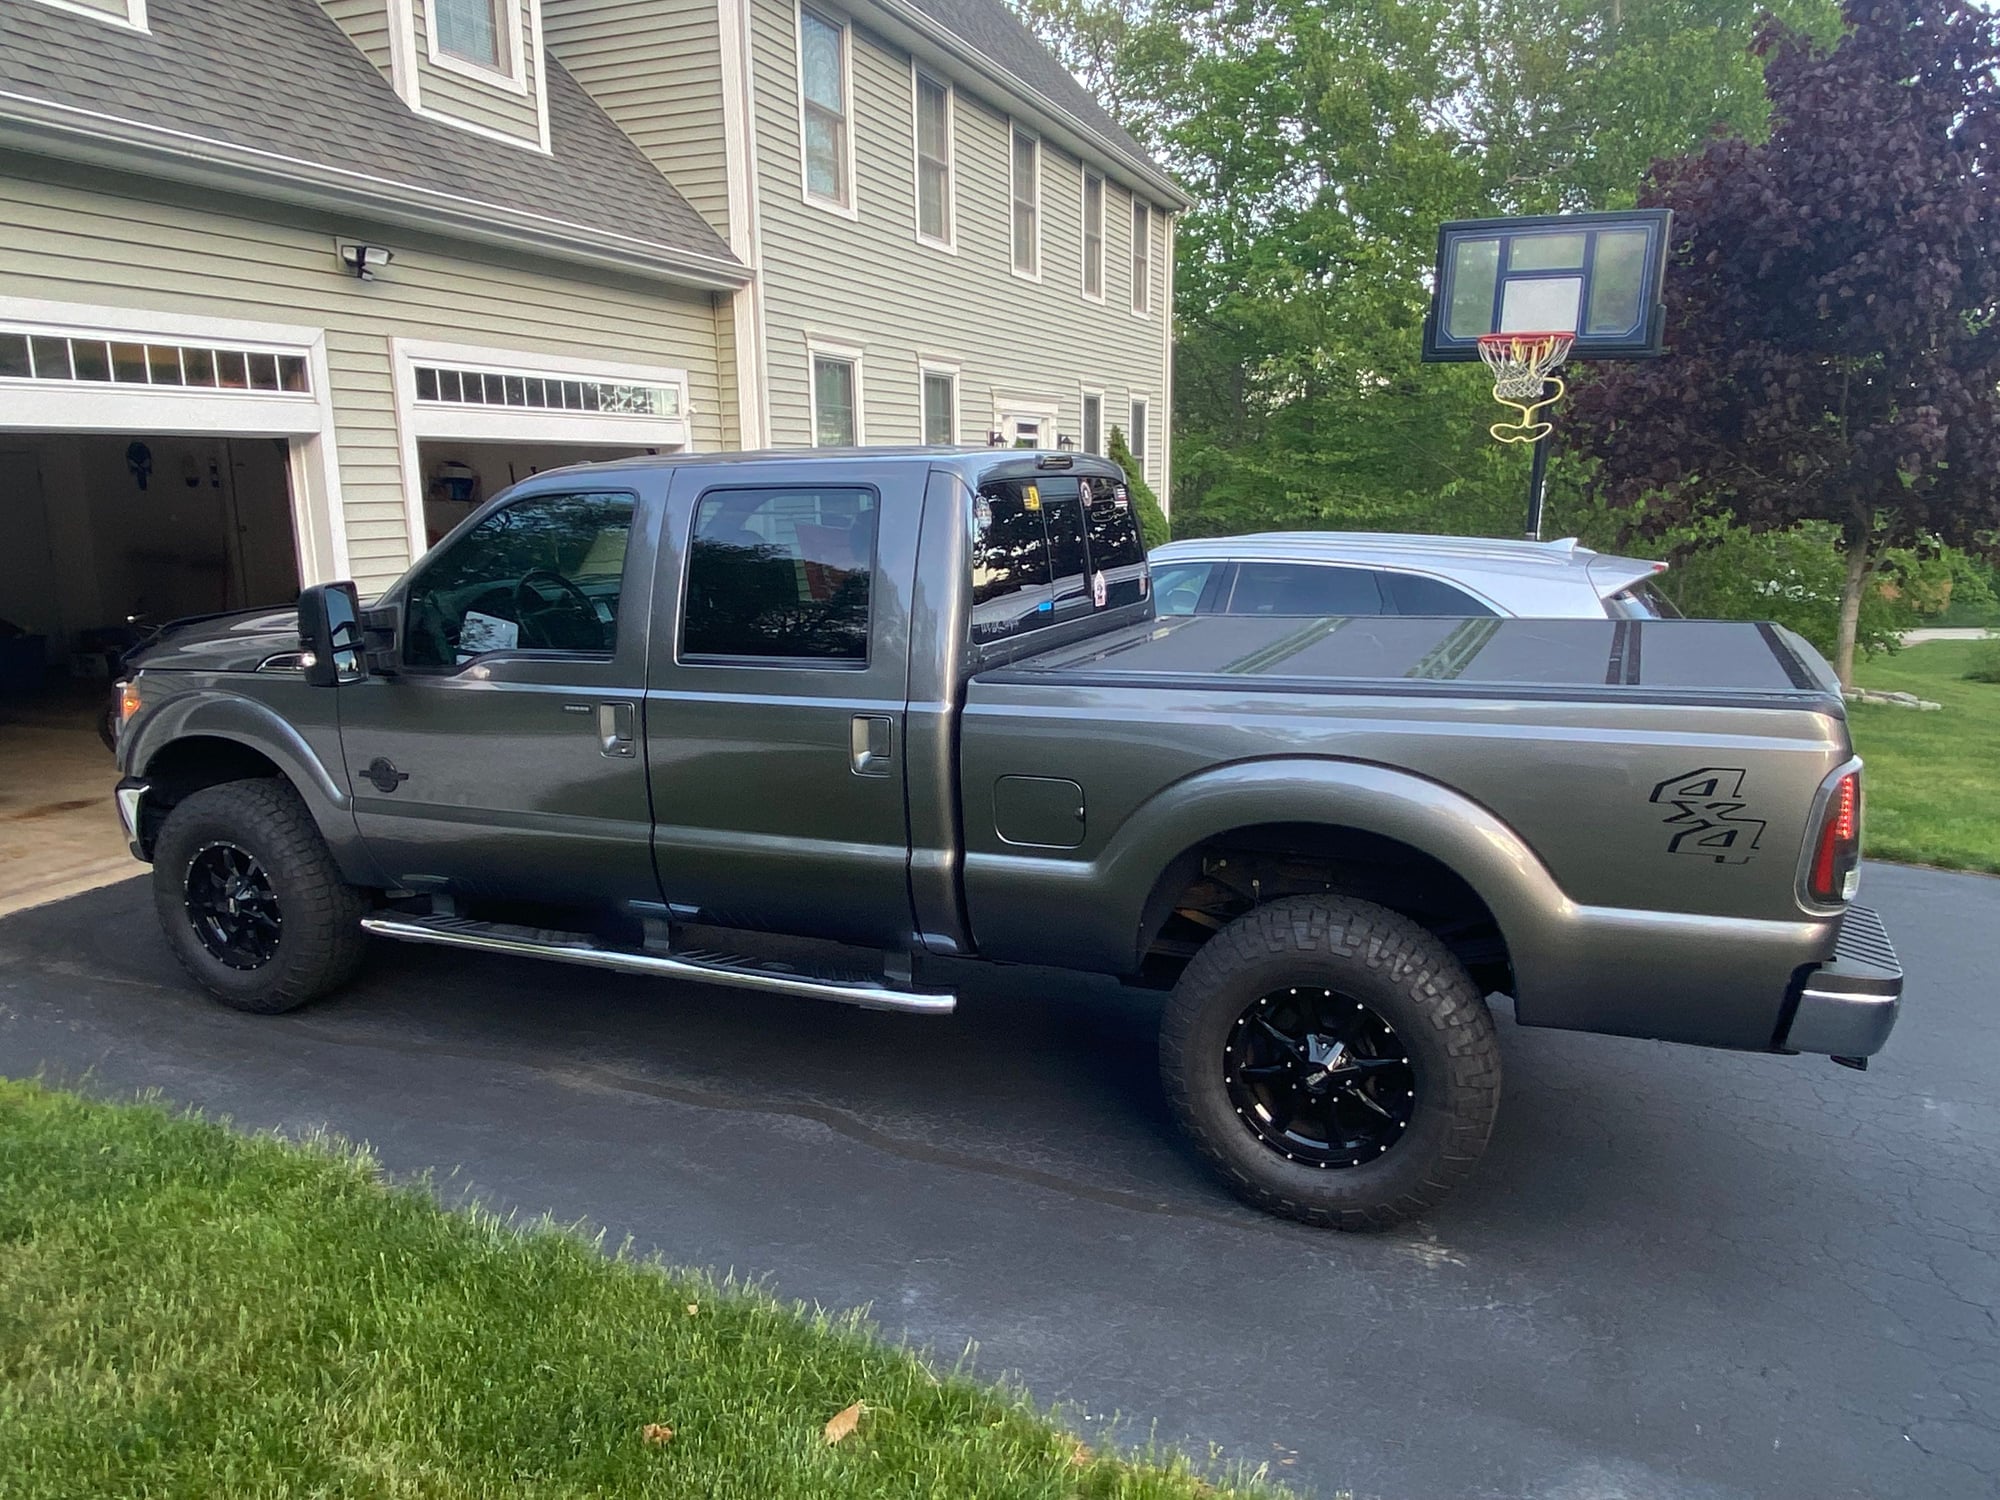 2011 Ford F-350 Super Duty - 2011 ford f350 6.7 diesel 46,000 miles - Used - VIN 1ft8w3bt5bec13865 - 8 cyl - 4WD - Automatic - Truck - Gray - East Hampton, CT 06424, United States